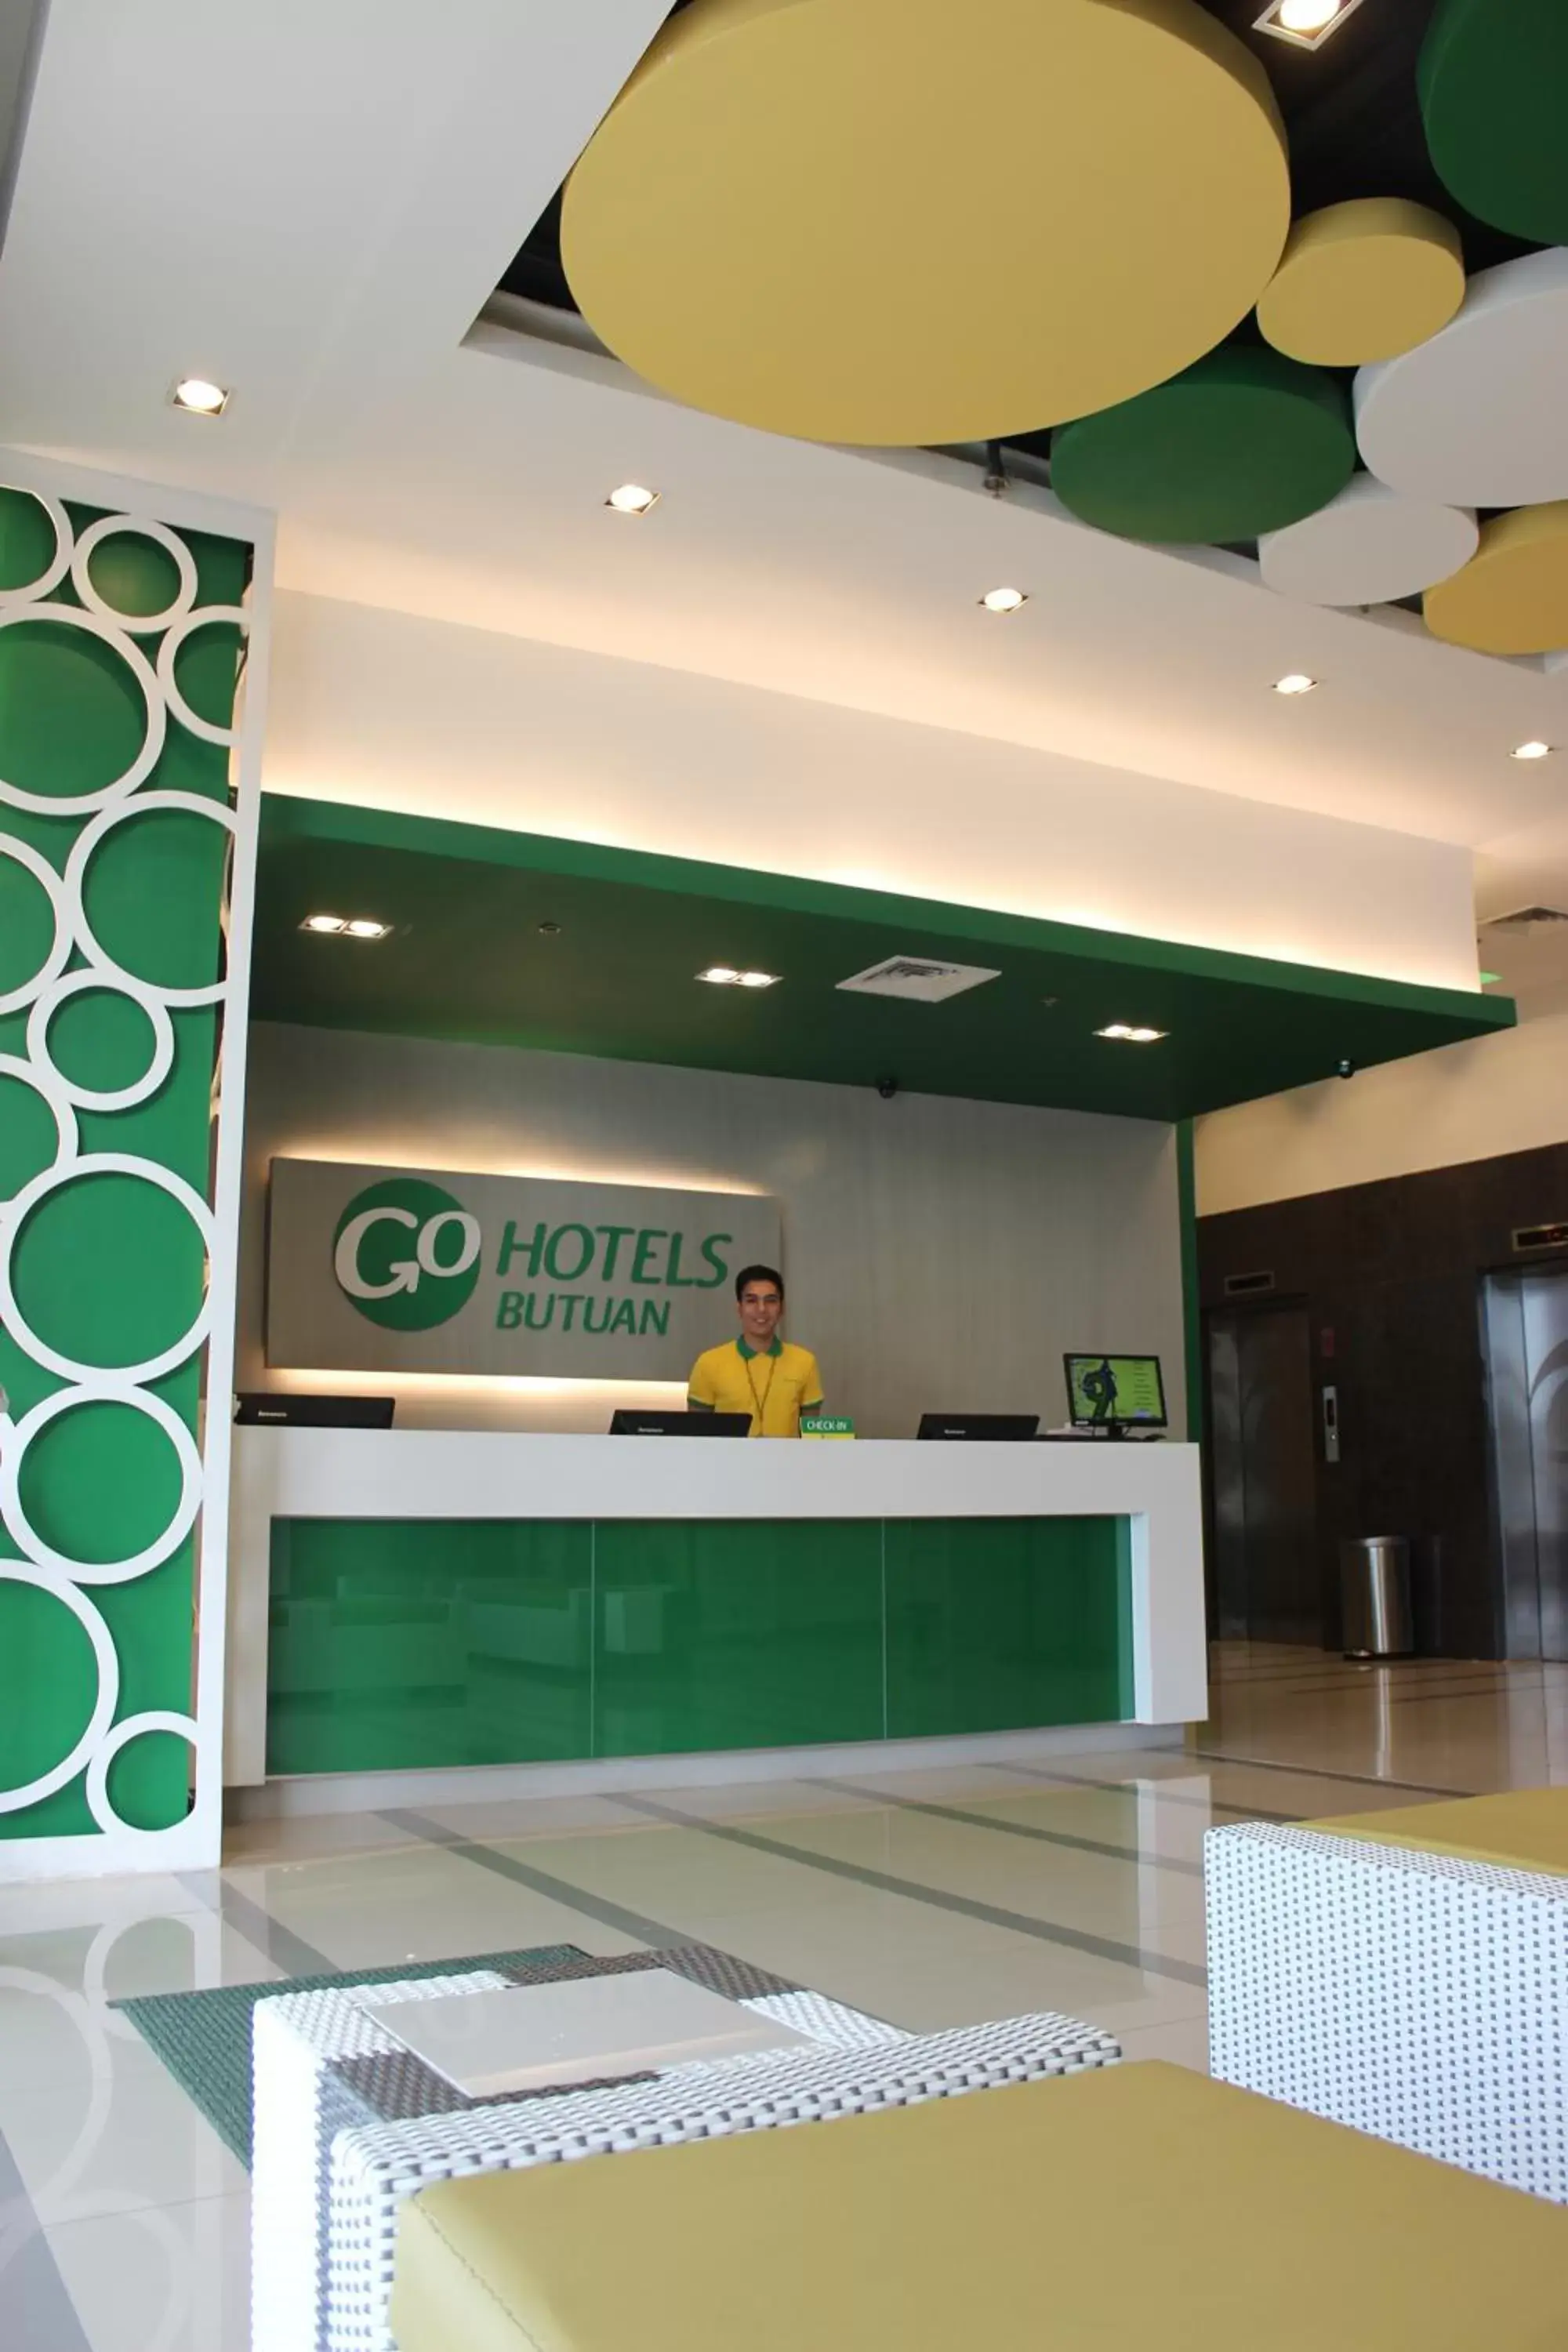 Property building in Go Hotels Butuan